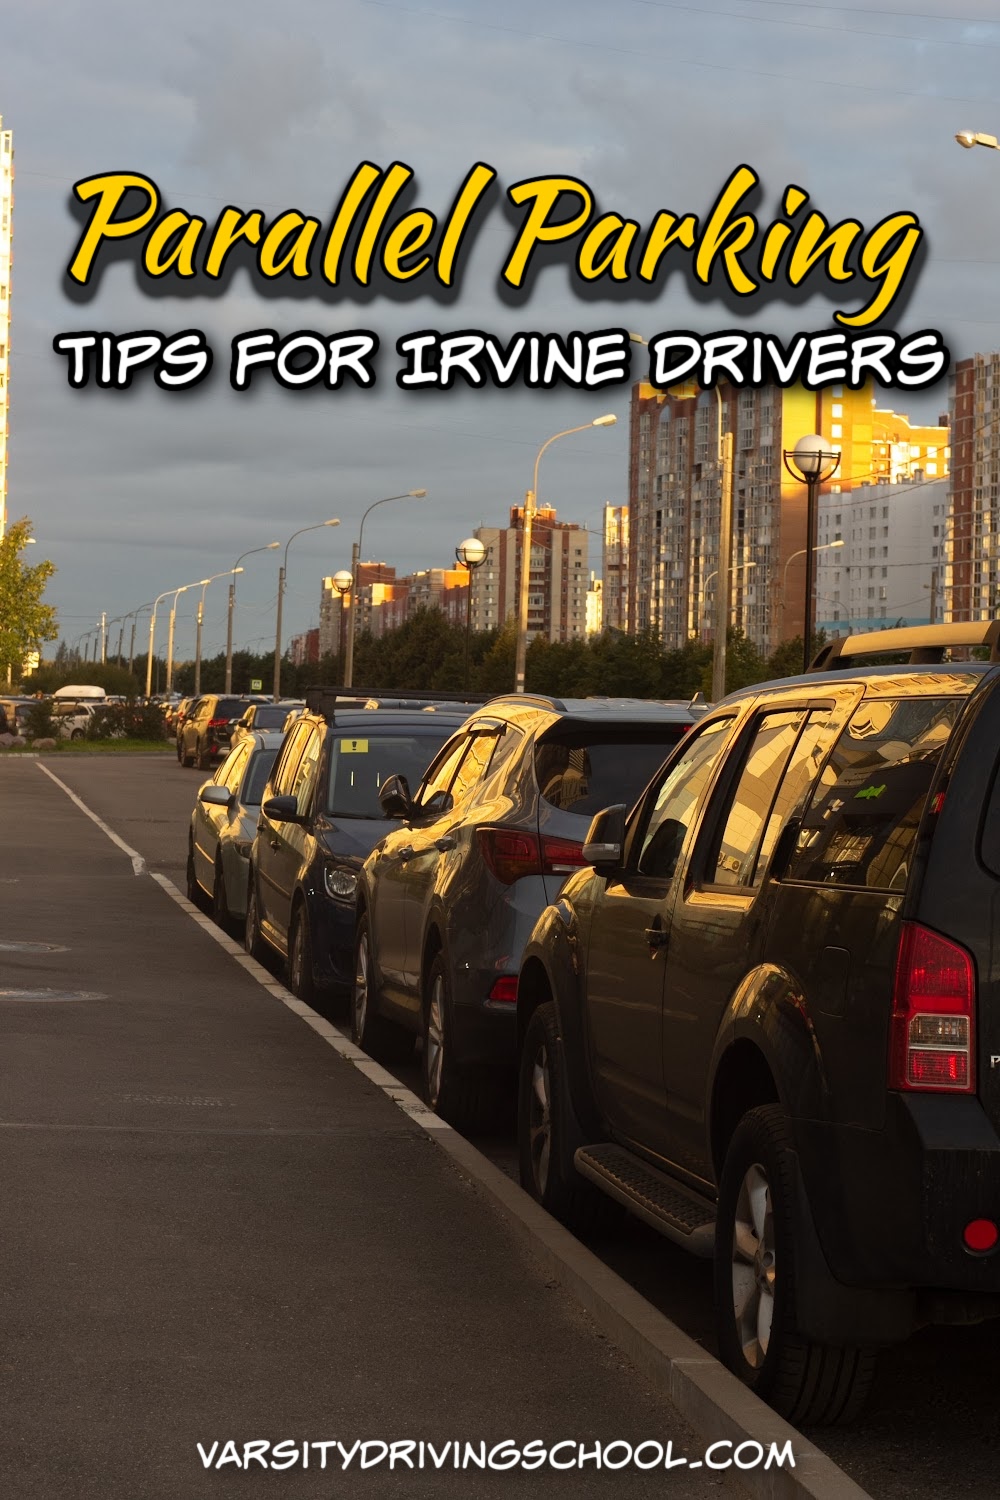 Parallel parking in Irvine is a fantastic way to practice and perfect the driving skill for when drivers visit bigger cities.